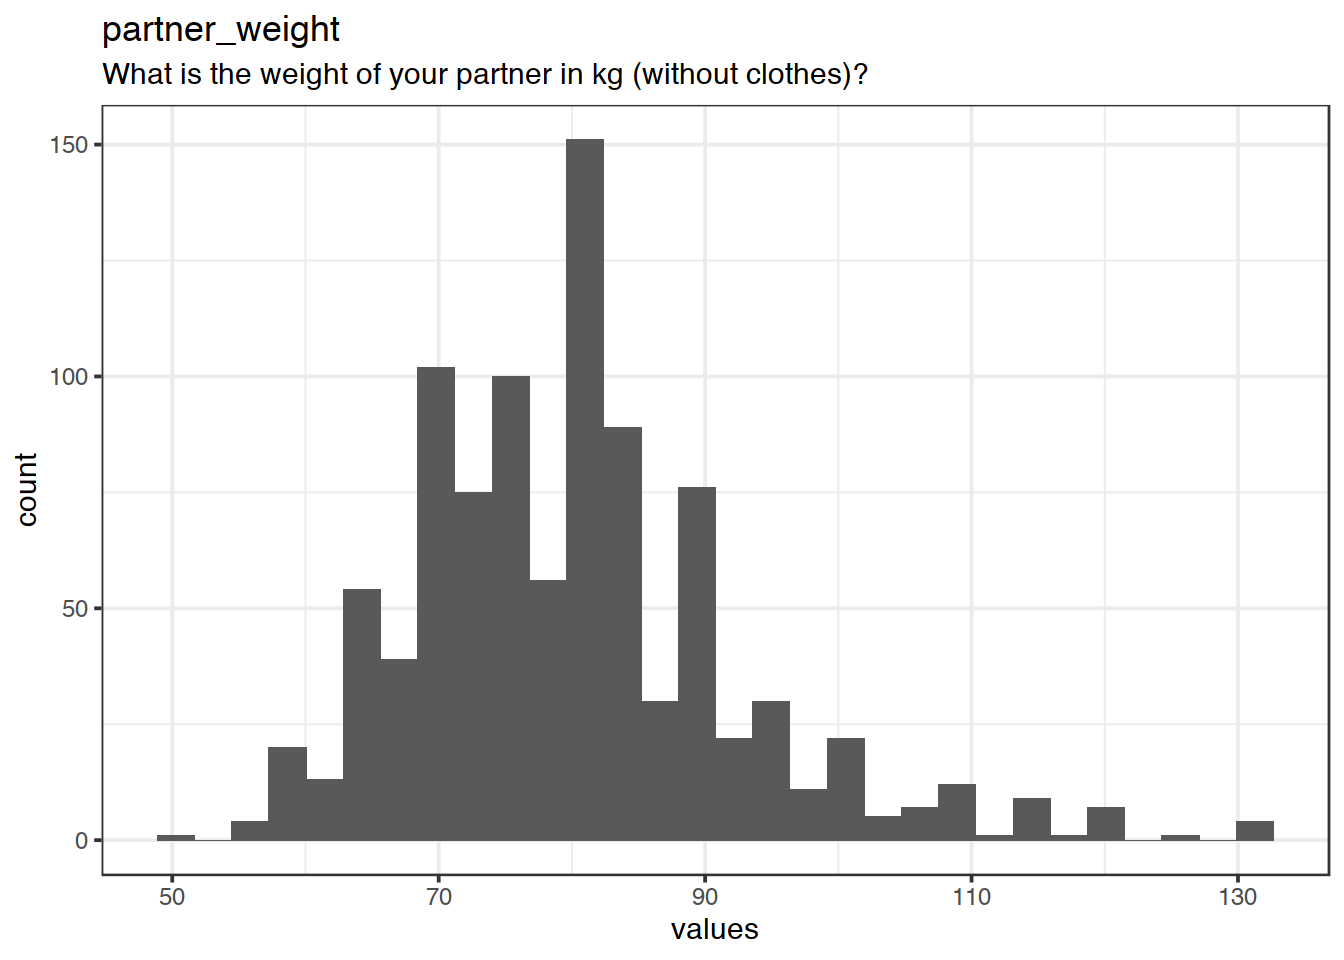 Distribution of values for partner_weight